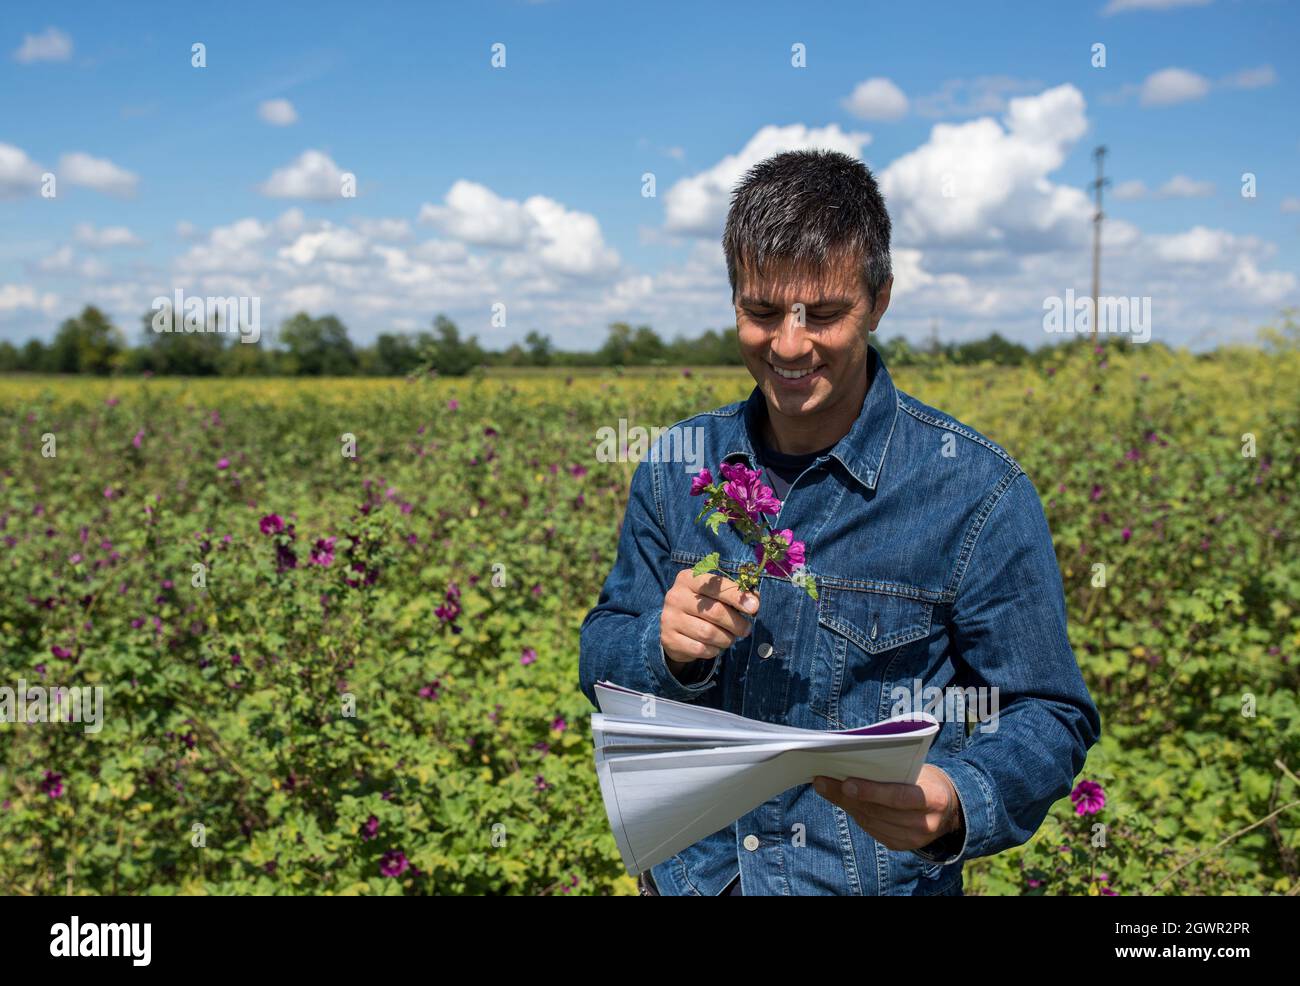 Handsome farmer monitoring high mallow plants in feld. Male agronomist holding tall mallow branch checking smiling outdoors in early autumn. Stock Photo